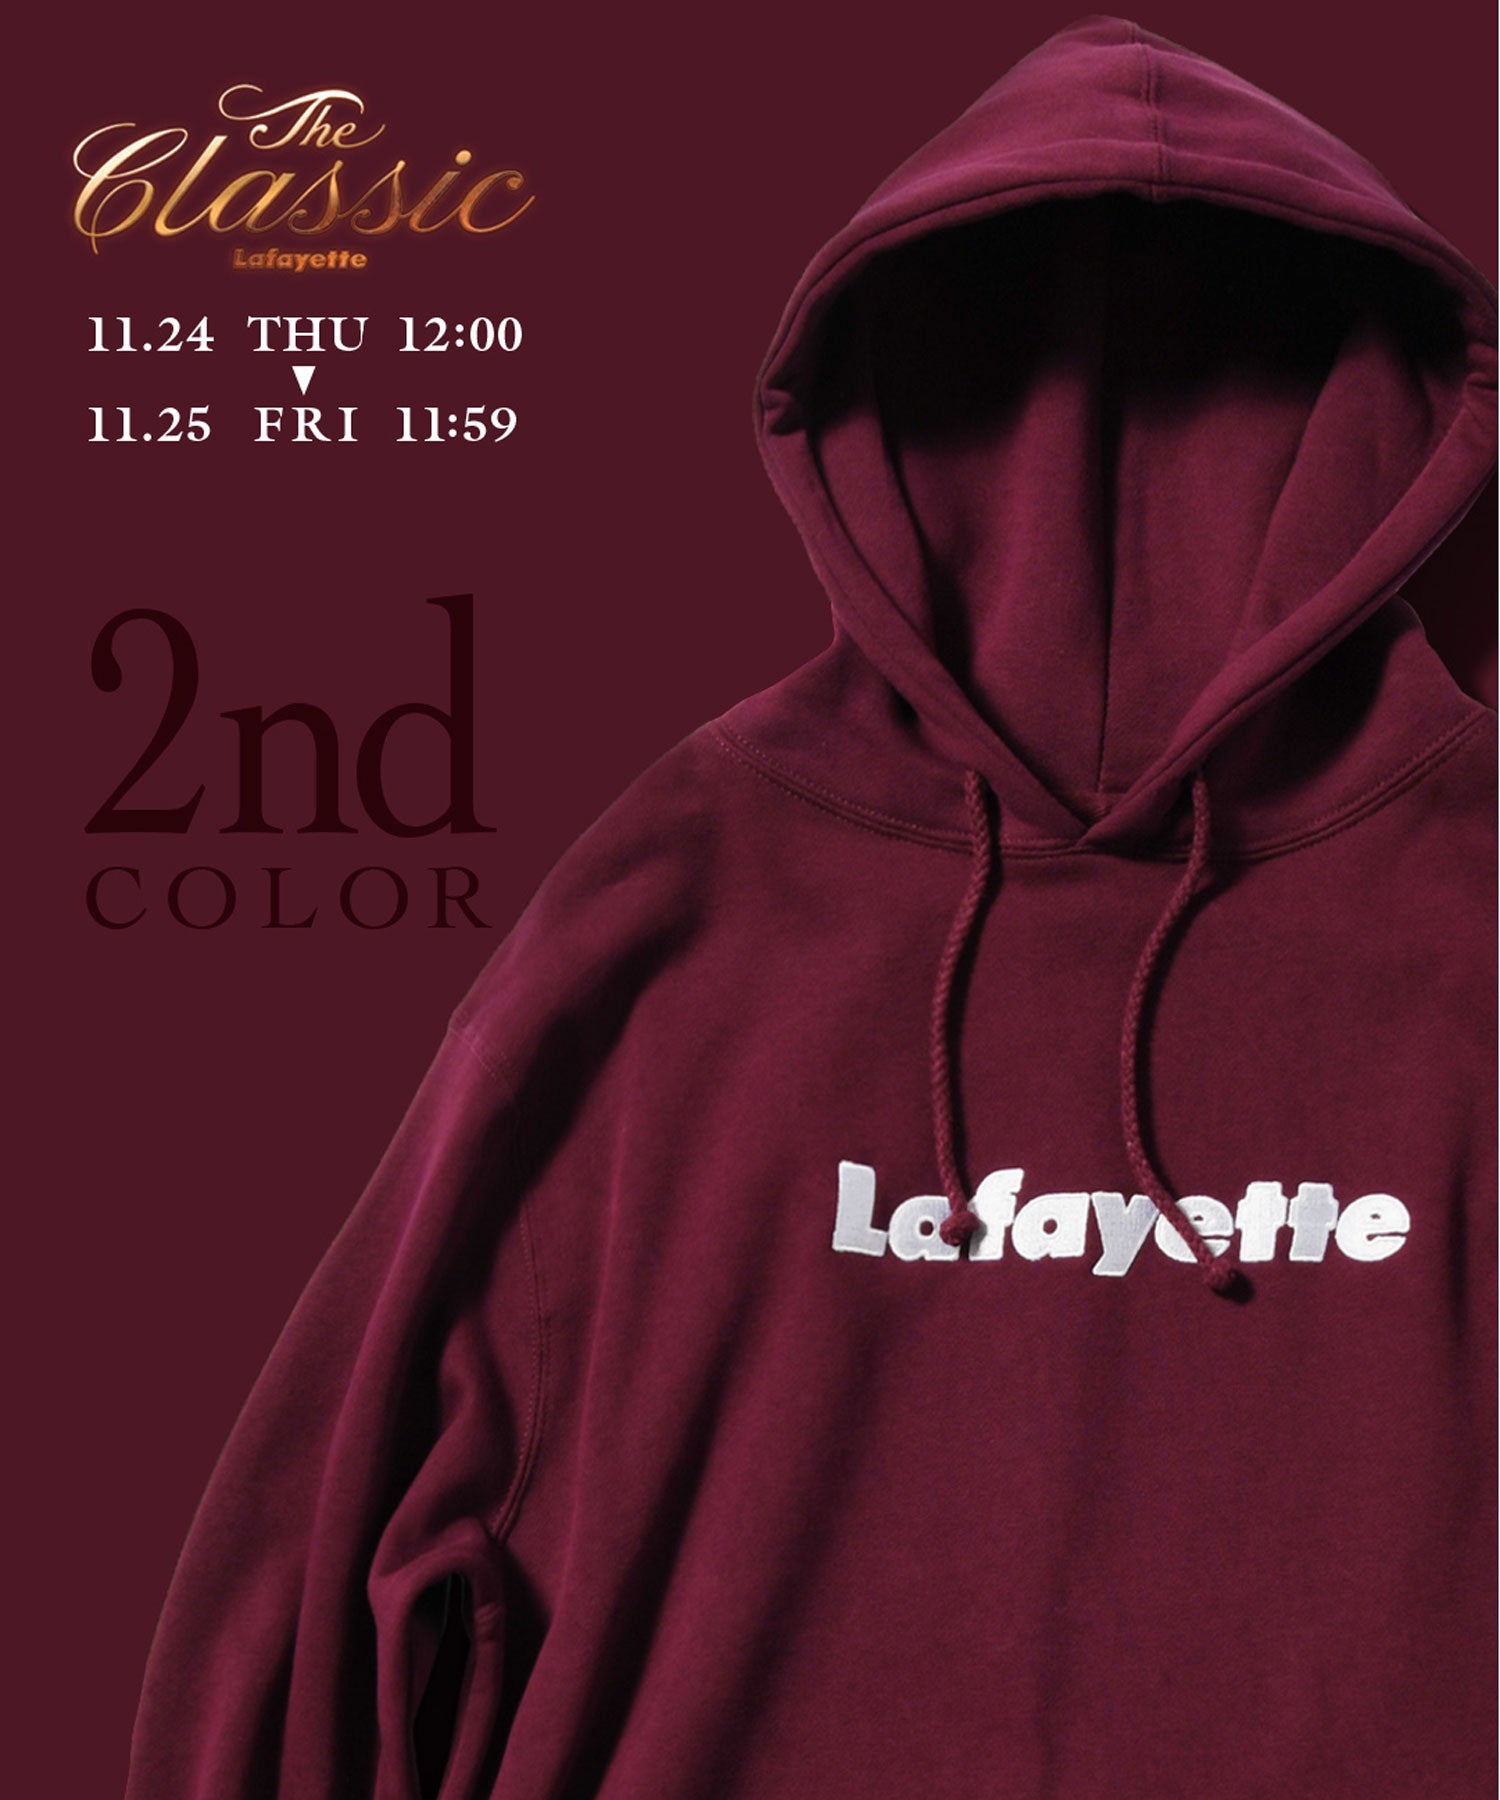 LFYT Lafayette LOGO HOODIE MAROON×WHITE LE22 The Classic